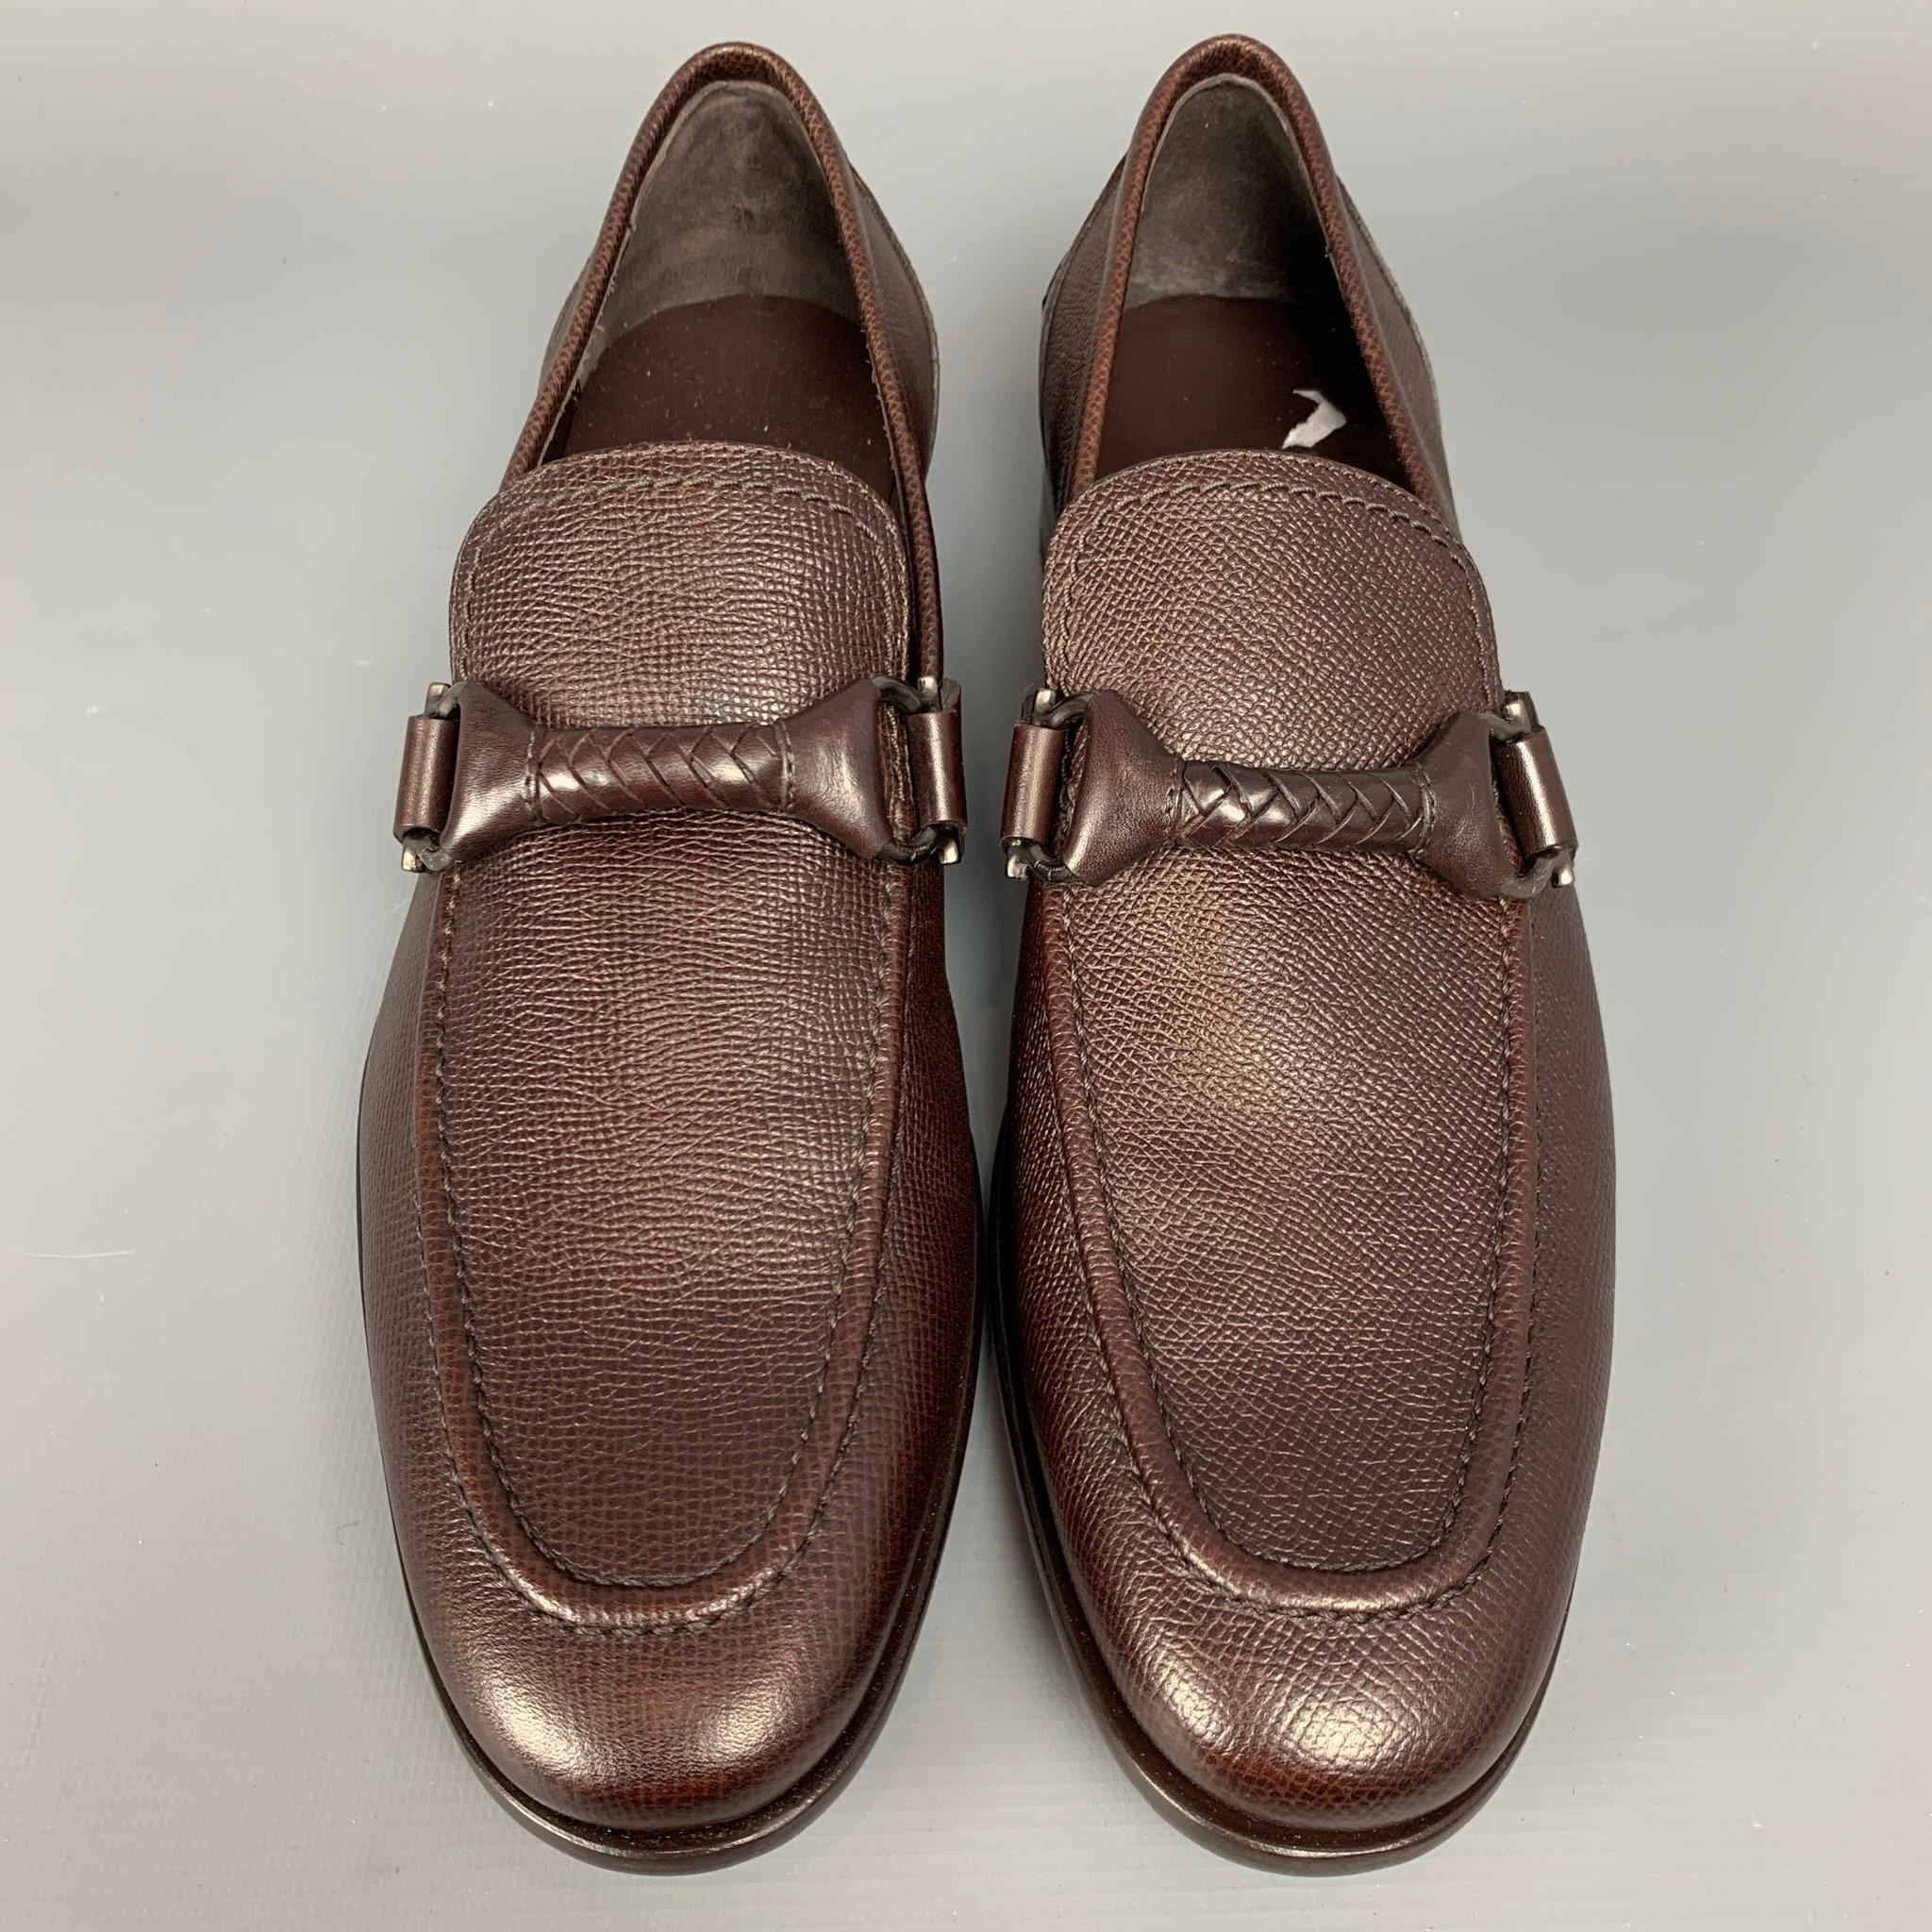 ferragamo pebbled leather loafers